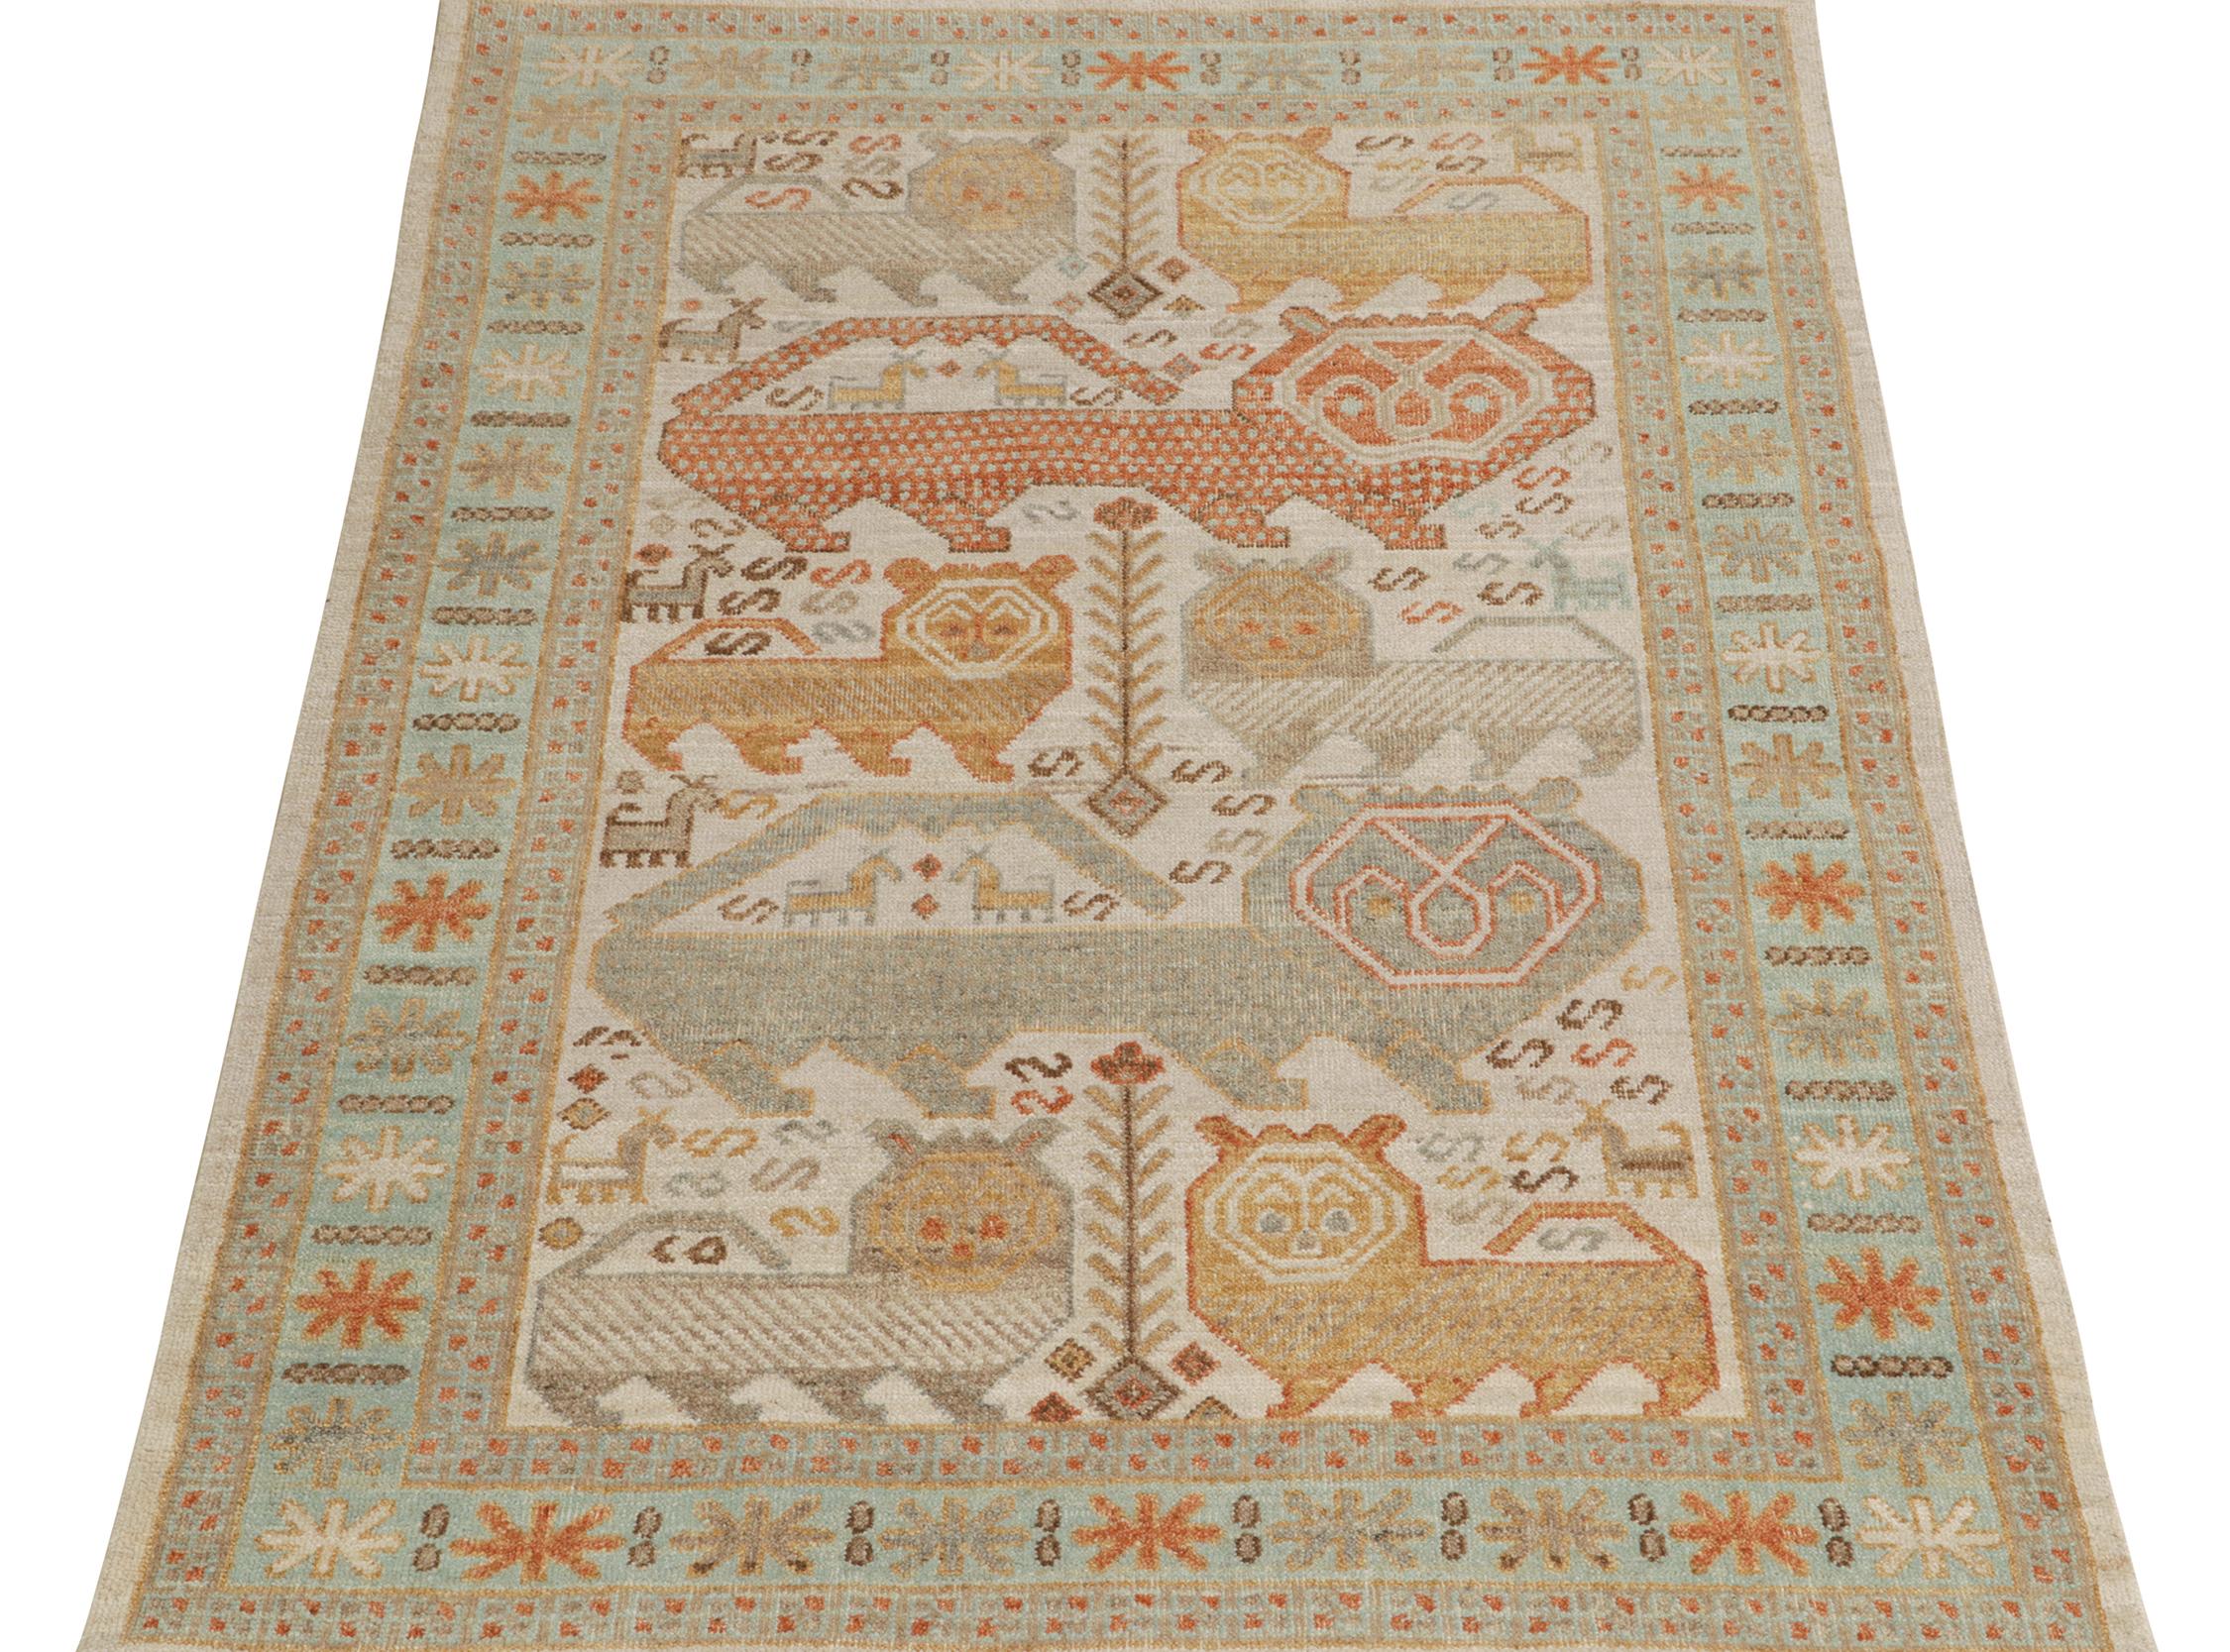 Indian Rug & Kilim’s Tribal Style Rug in Beige-Brown, Blue and Red Pictorials For Sale